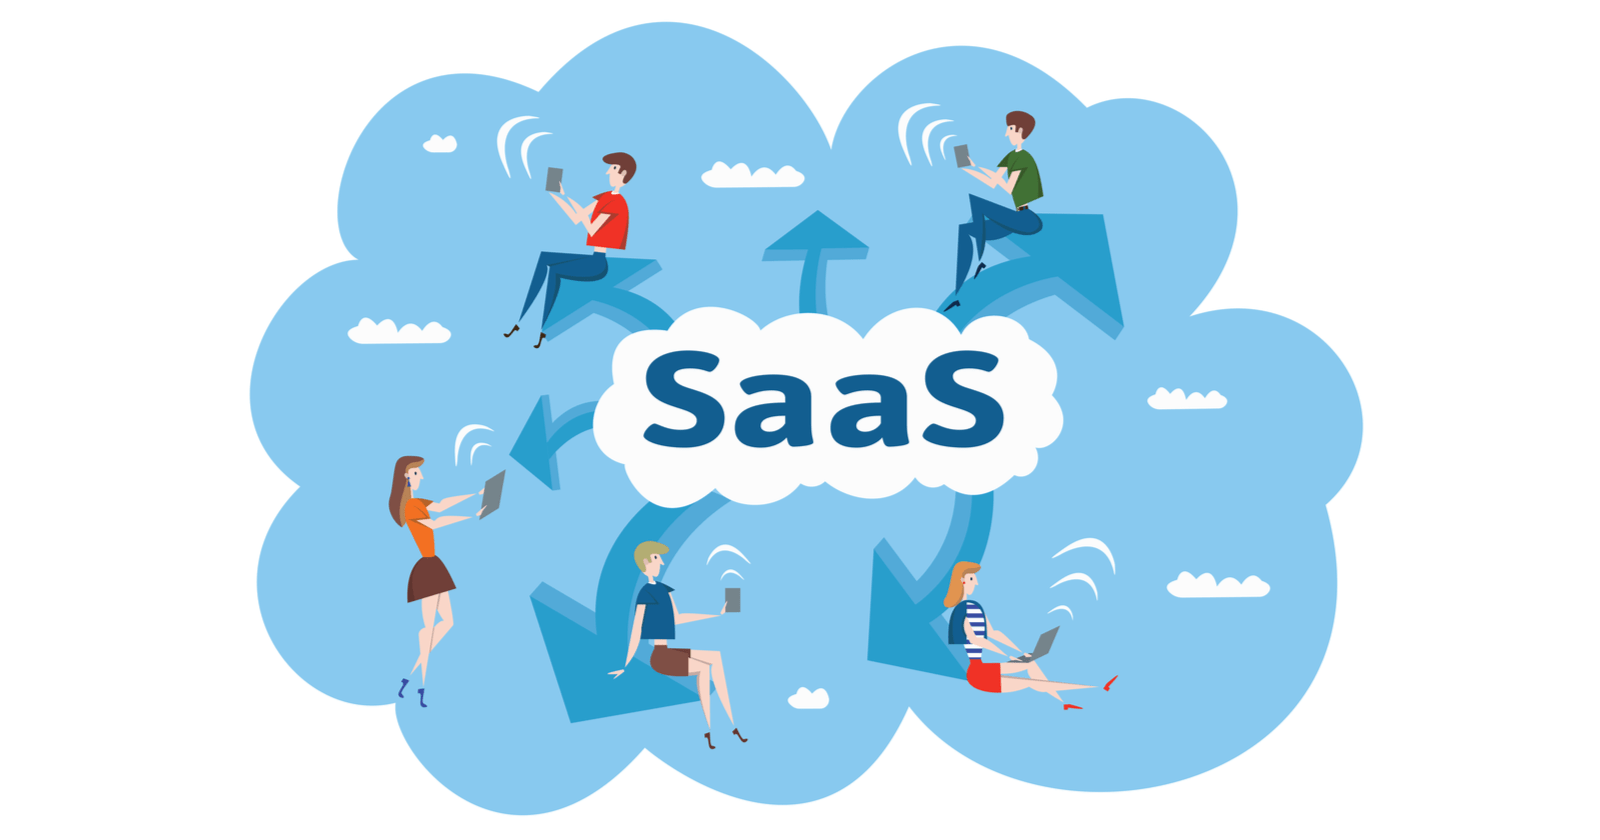 How to Build a SaaS Product: Step by Step Guide?